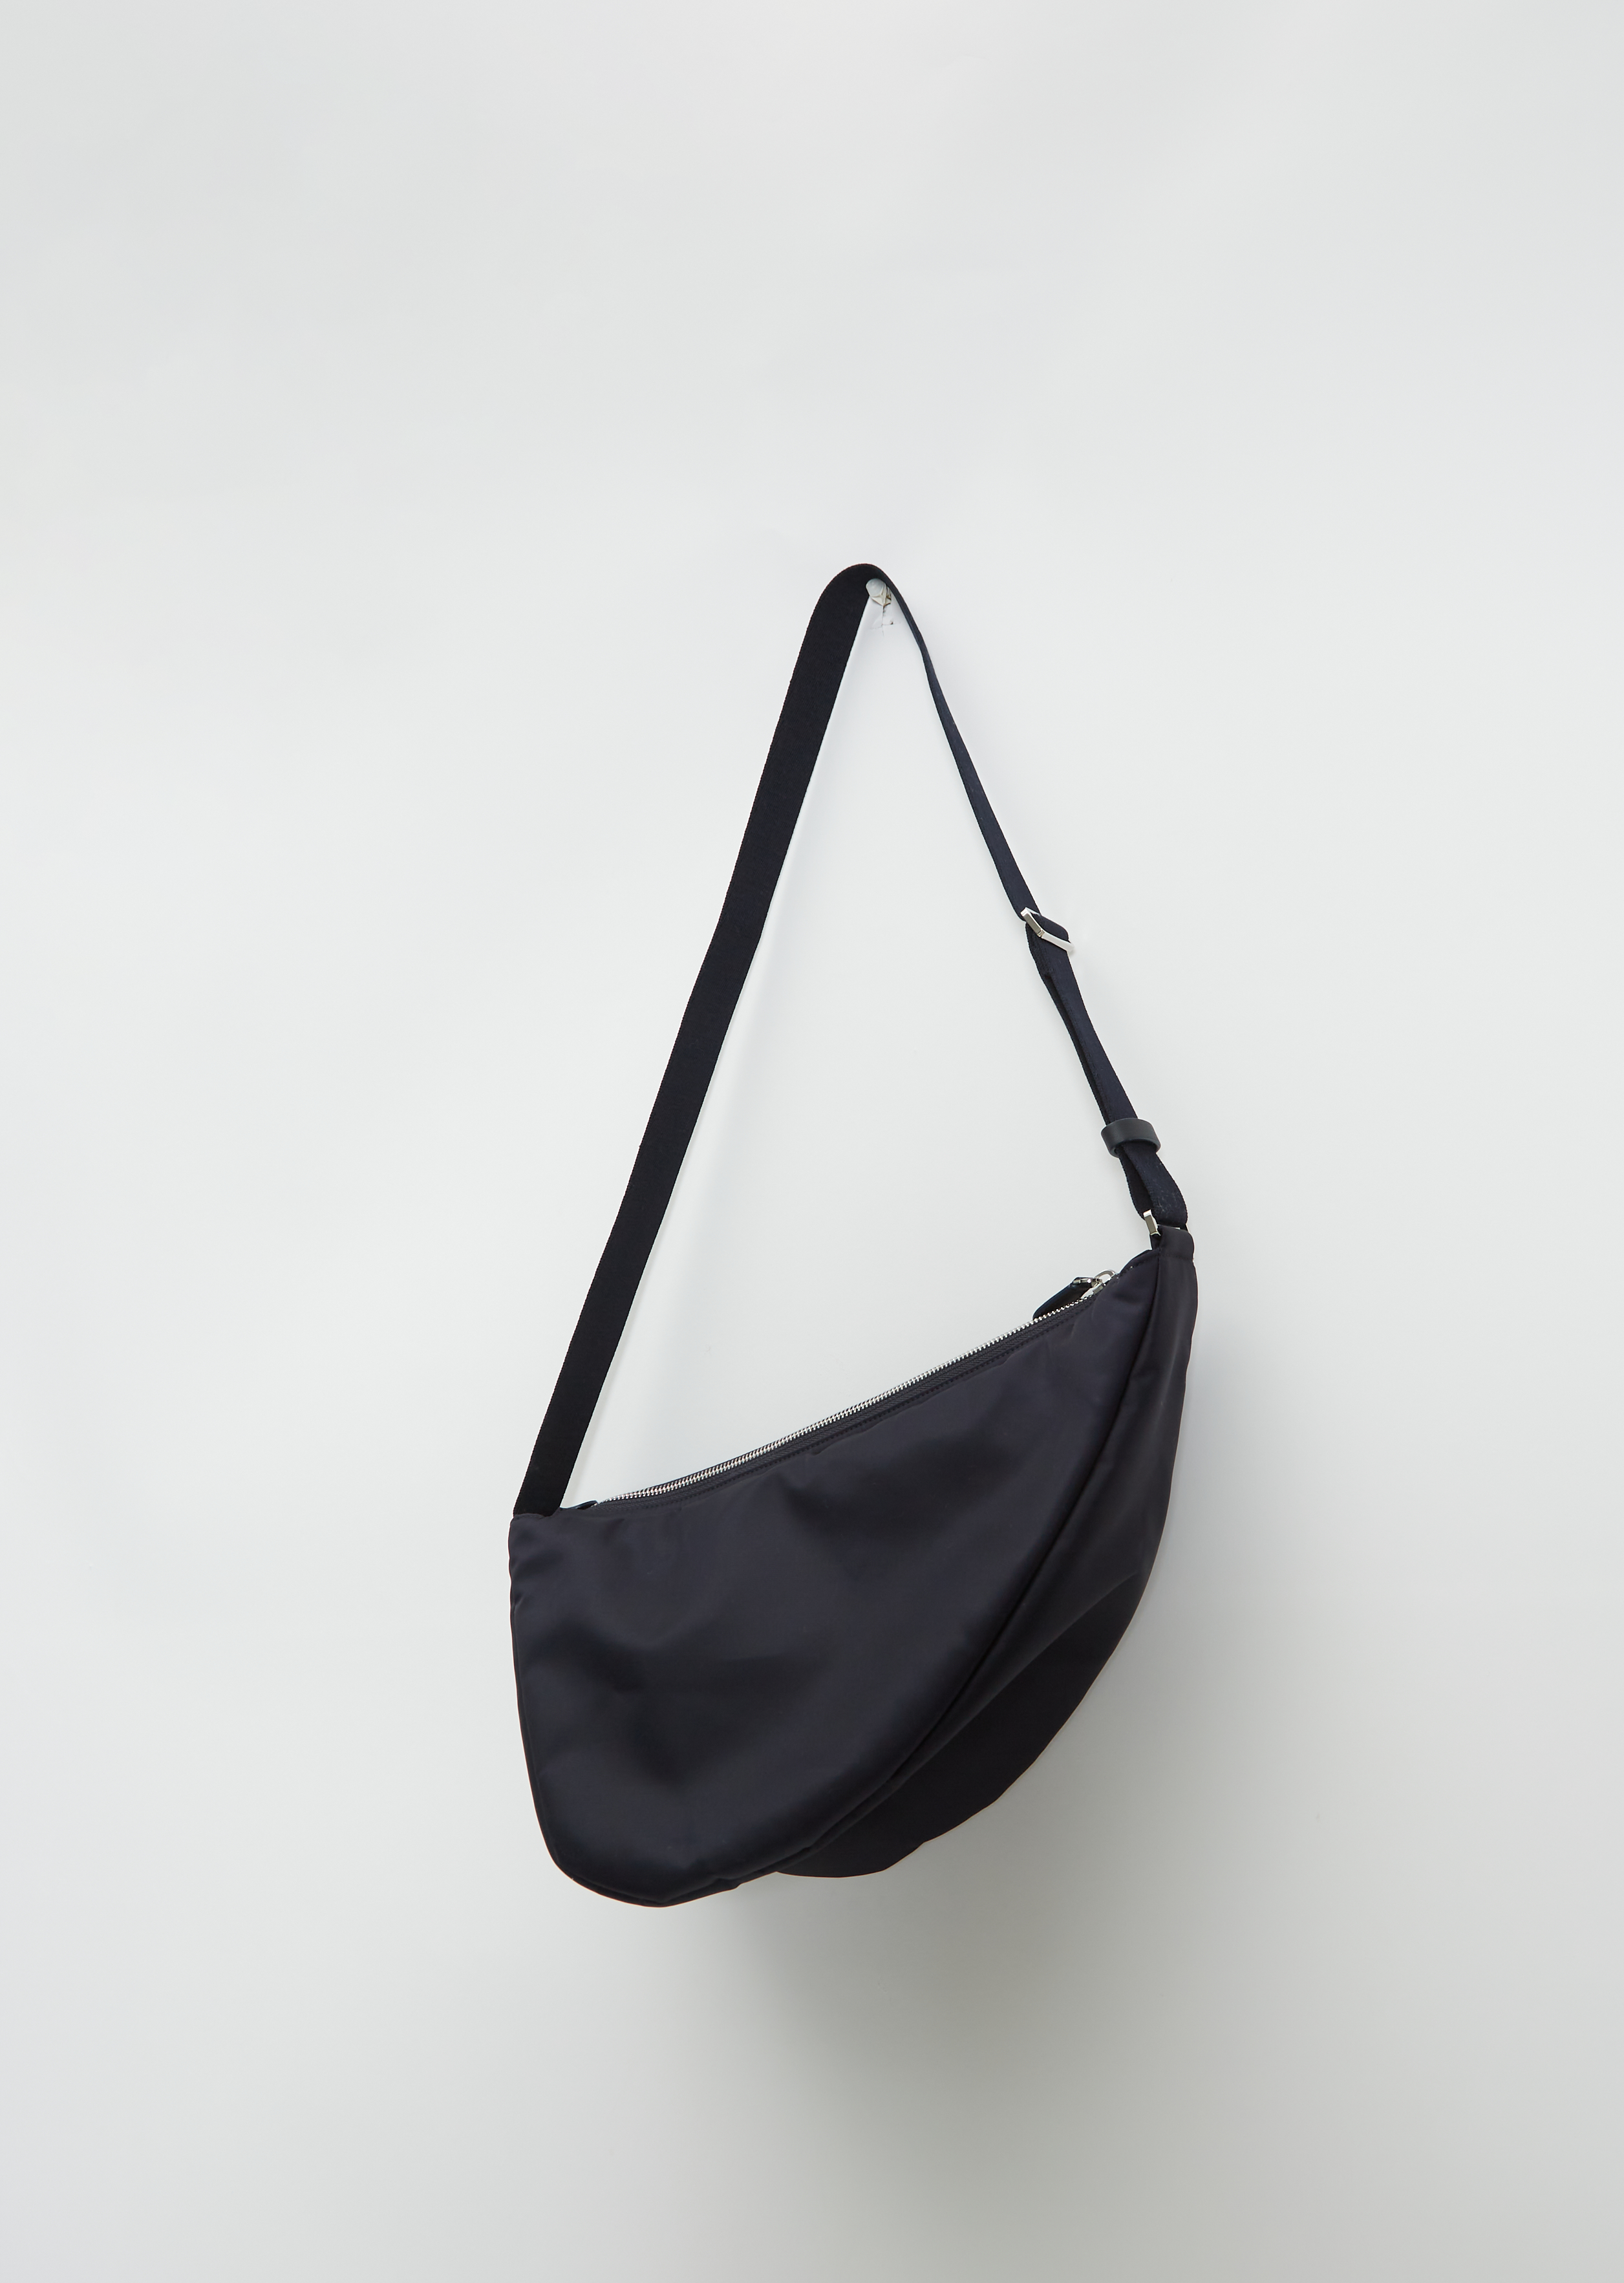 The Row Slouchy Banana Two Nylon Shoulder Bag in Brown